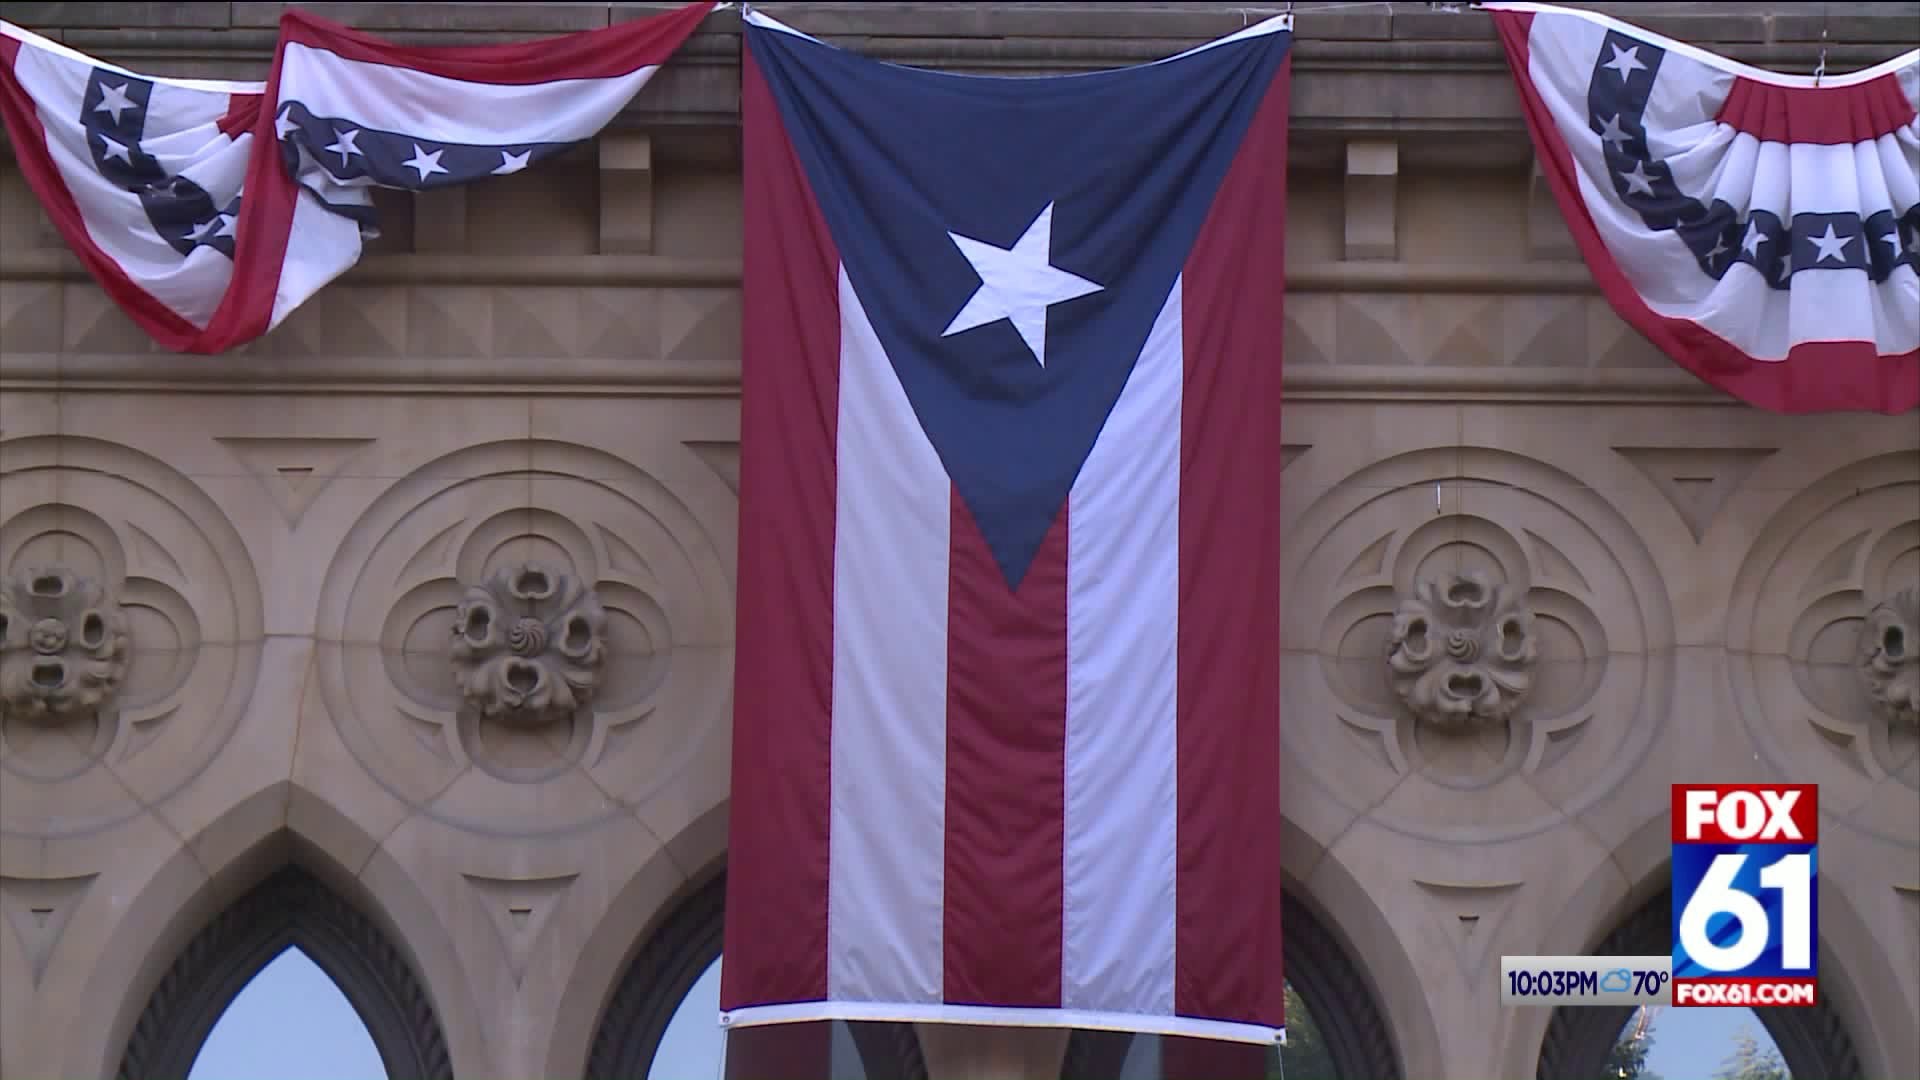 New Haven host`s Fourth Annual Puerto Rican Festival